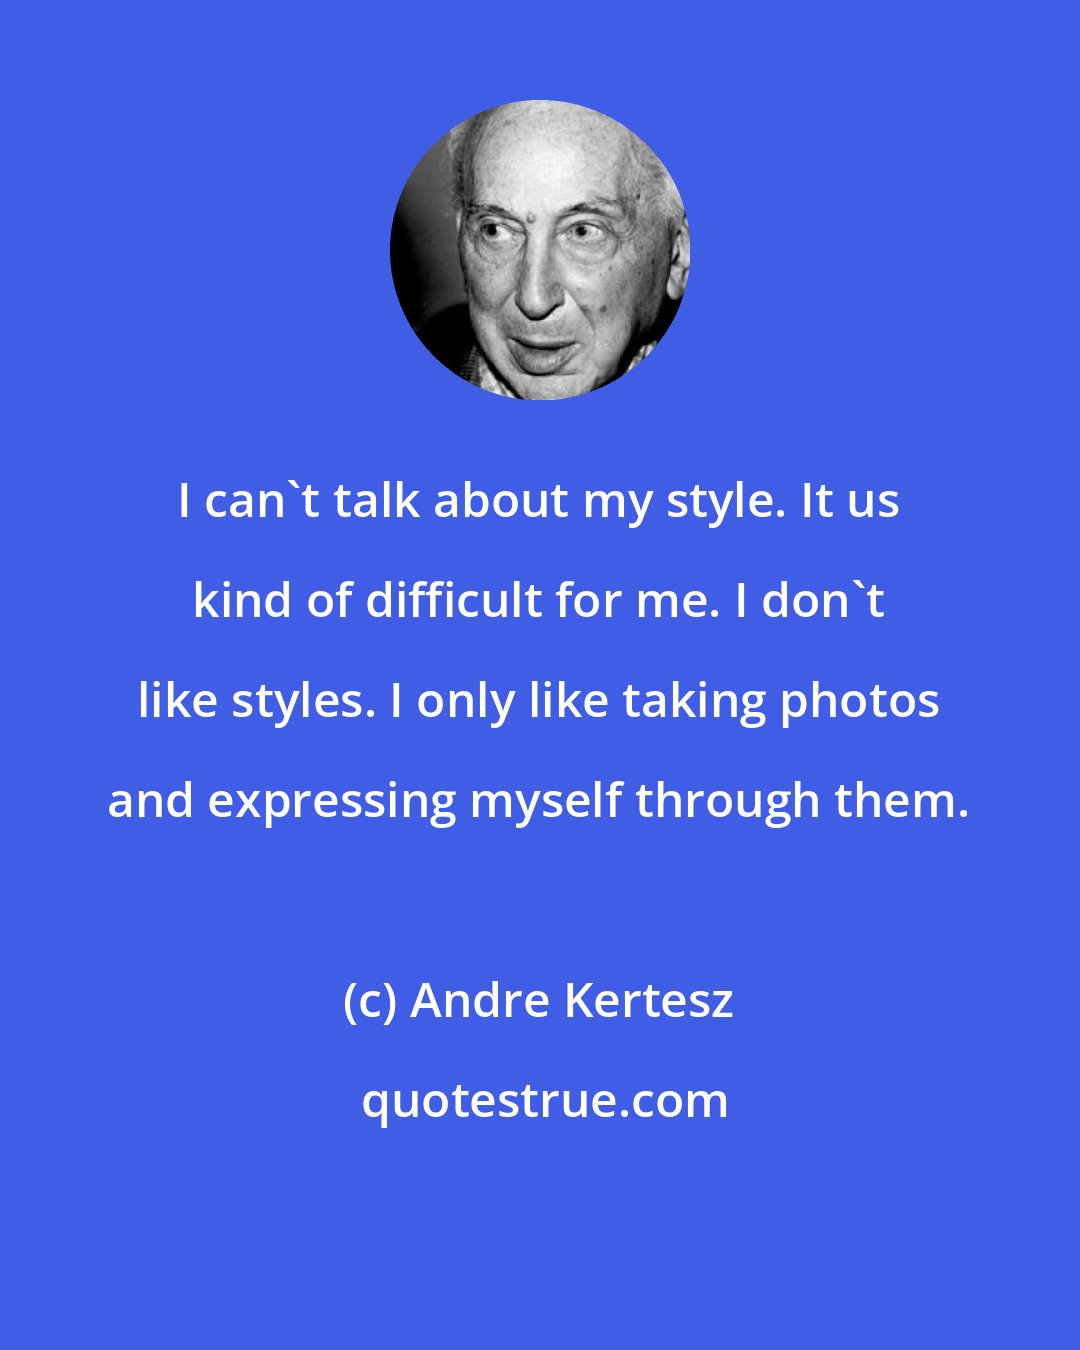 Andre Kertesz: I can't talk about my style. It us kind of difficult for me. I don't like styles. I only like taking photos and expressing myself through them.